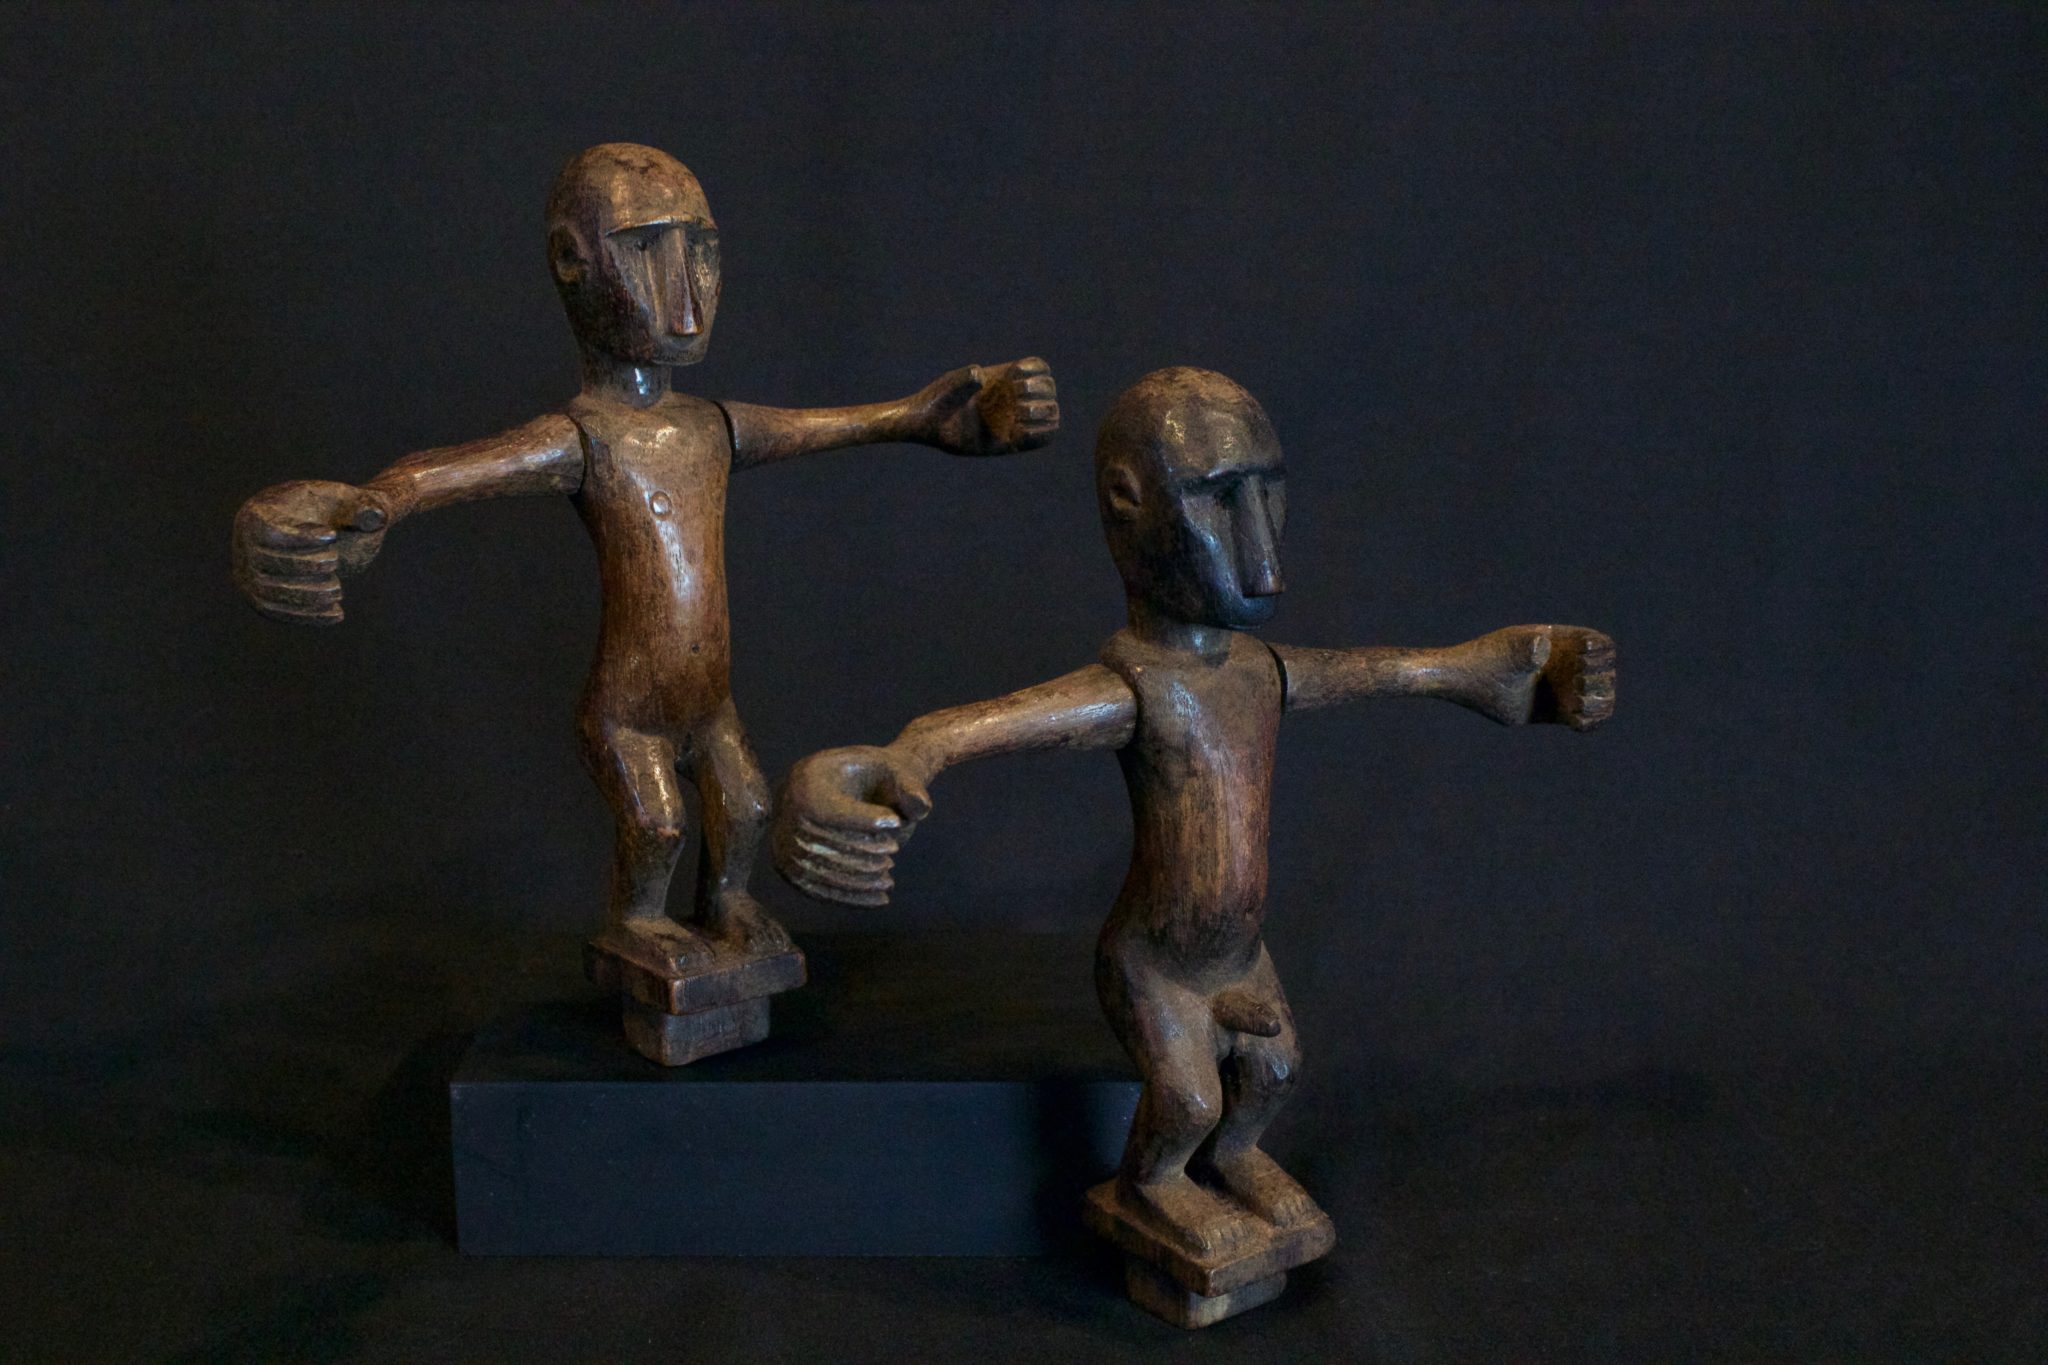 Shaman Healing Figures, Male and Female Couple, Flores Island, Lesser Sunda Islands, Mid 20th c. Wood, patinated with use and age. One of the pair held in each hand during a ceremonial dance for healing a marriage. (female - 8” x 7 ¾” x 1”); (male - 8” x 8” x 1 ½”), $590 (sold as pair)